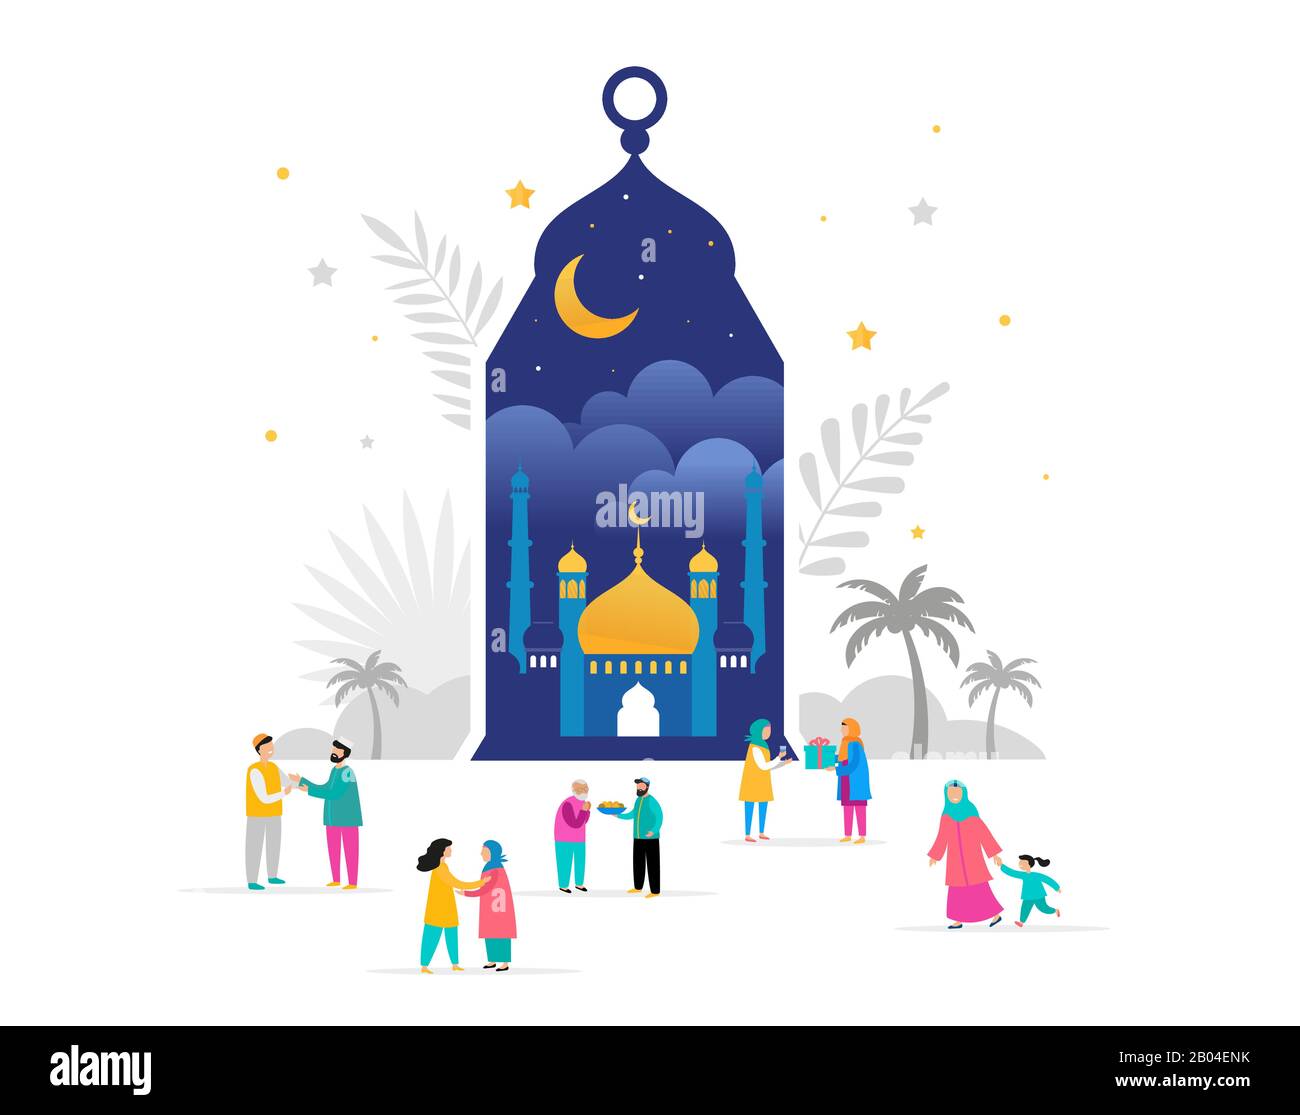 Ramadan Kareem, Eid mubarak, greeting card and banner with many people, giving gifts, food. Men, women and children walking on the street. Islamic Stock Vector